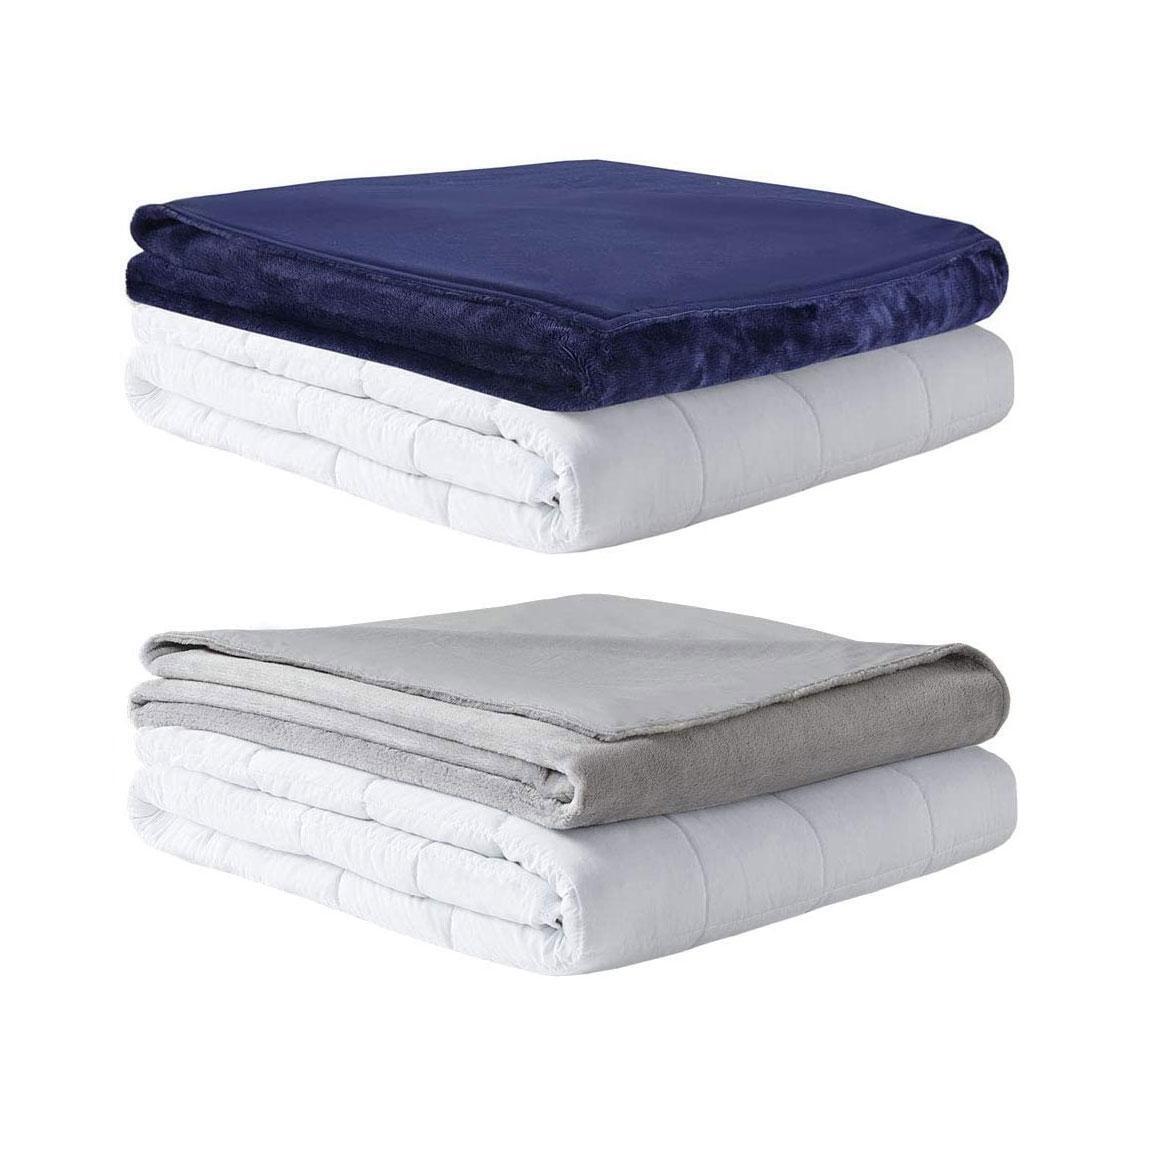 MP2 Glacier Weighted Blanket with Nano-Ceramic Beads Reversible Cooling & Warm Cover for Hot and Cold Sleepers